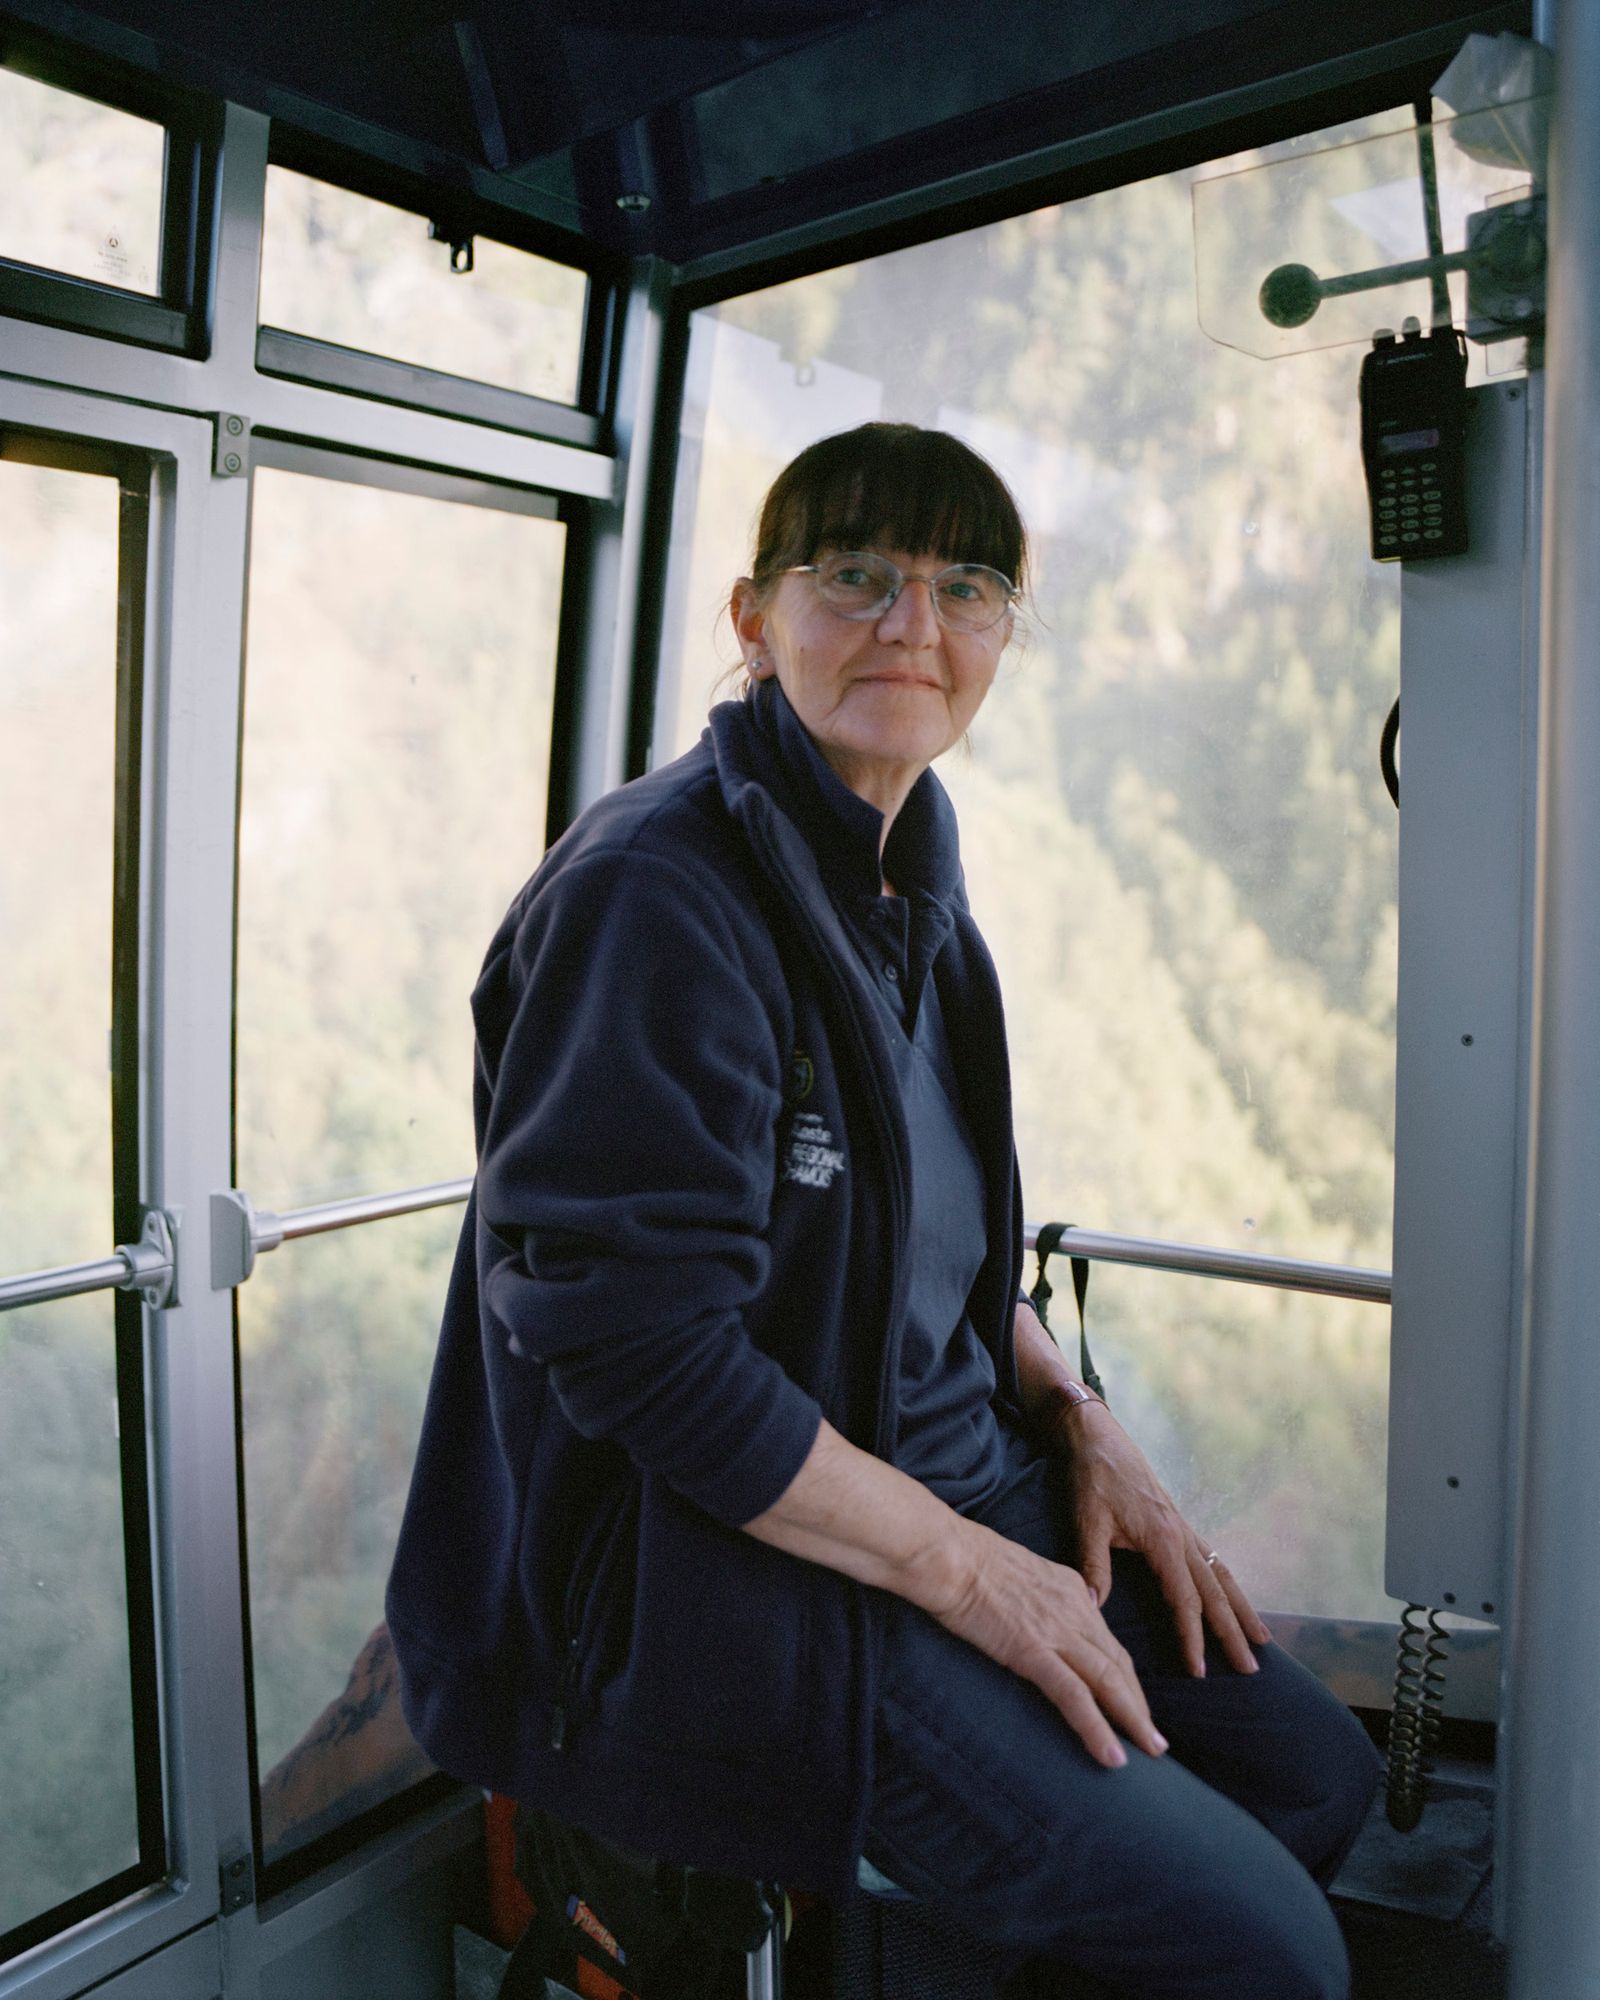 © Nola Minolfi - Angela.Born in Chamois, she is the oldest employee working at the cable-car.